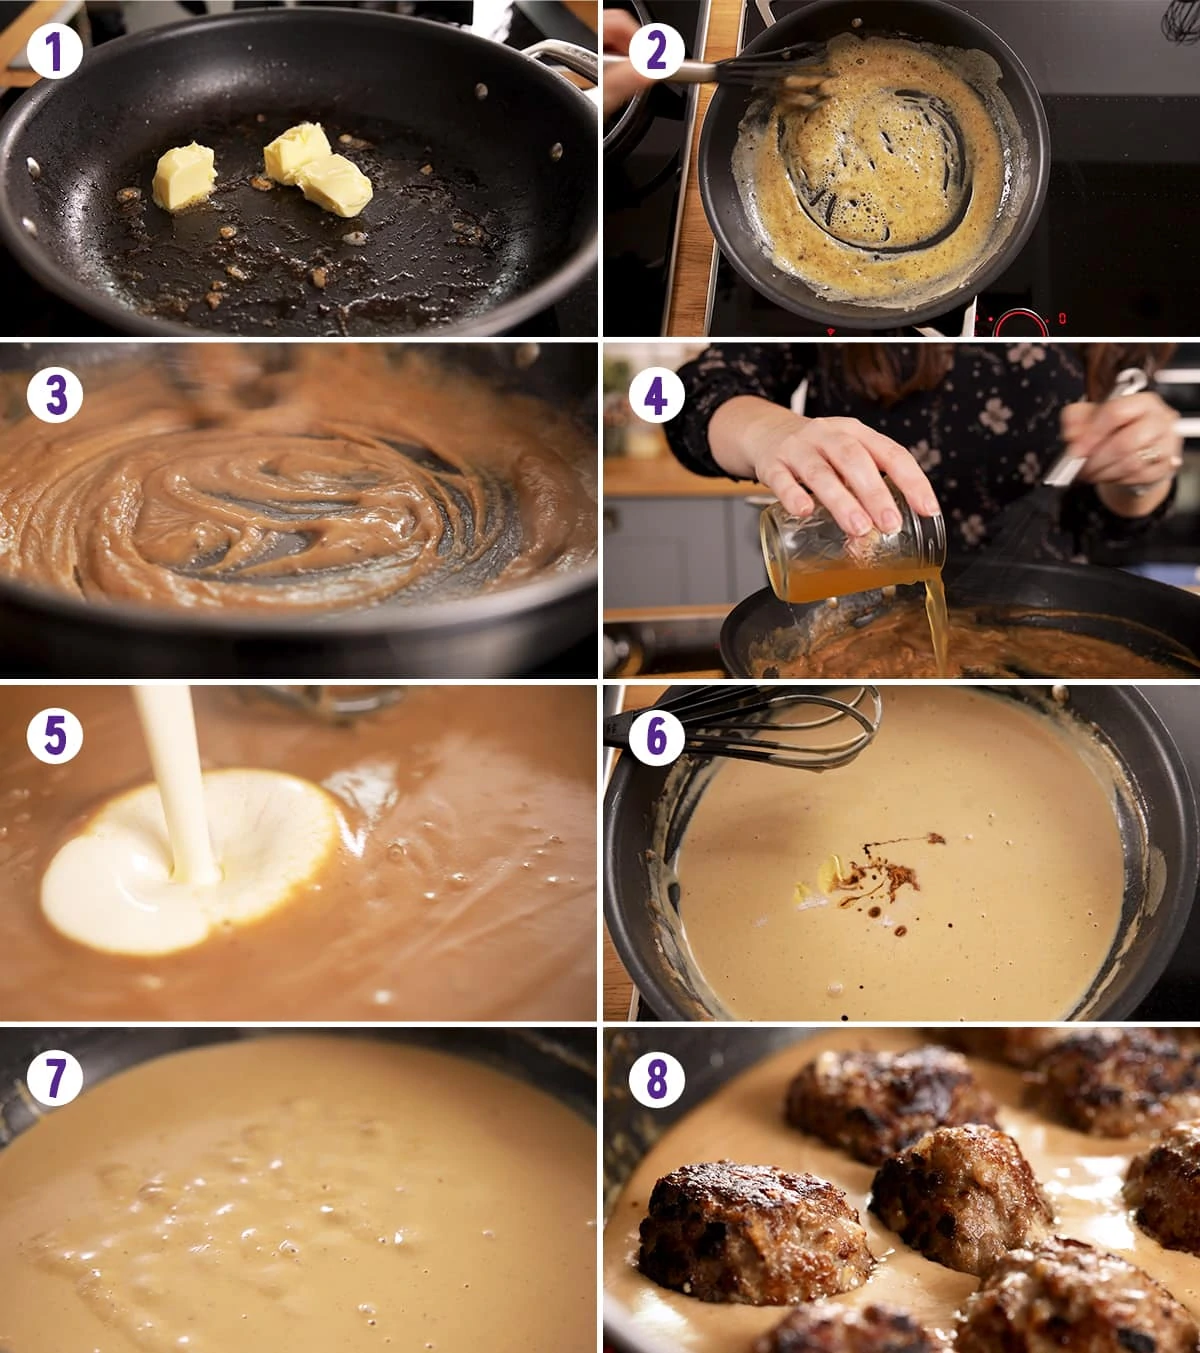 8 image collage showing how to make the sauce for Swedish meatballs